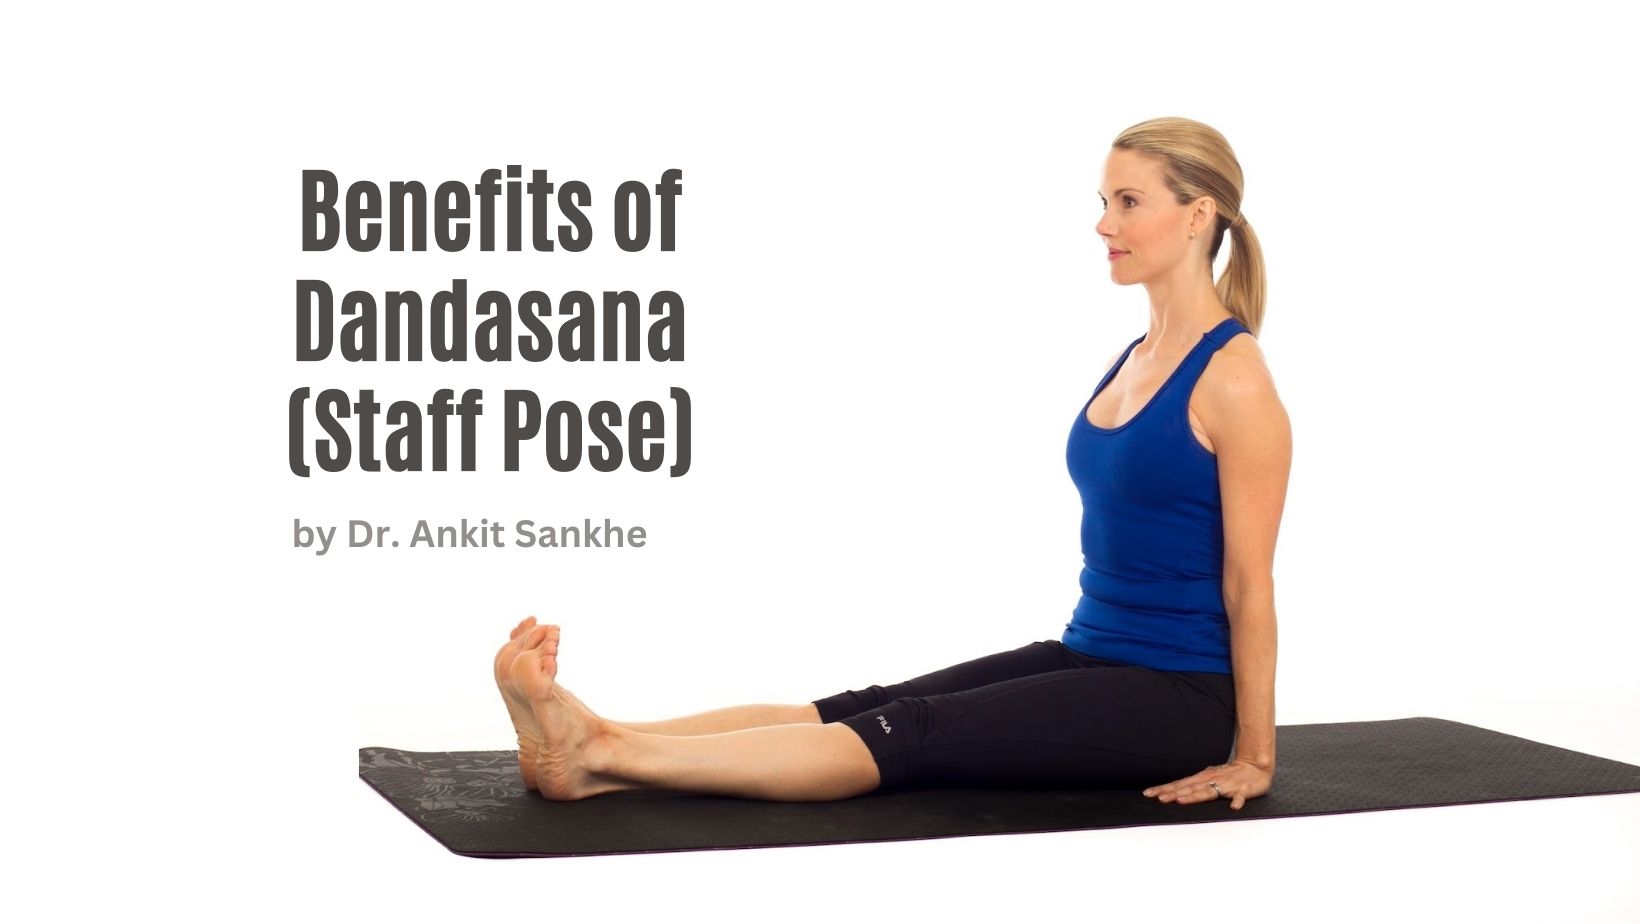 Redpoint Bristol - Why try Chaturanga Dandasana - Four Limbed Staff Pose  Four Limbed staff pose or Chaturanga Dandasana as it is called in Sanscript  is so much more than just a